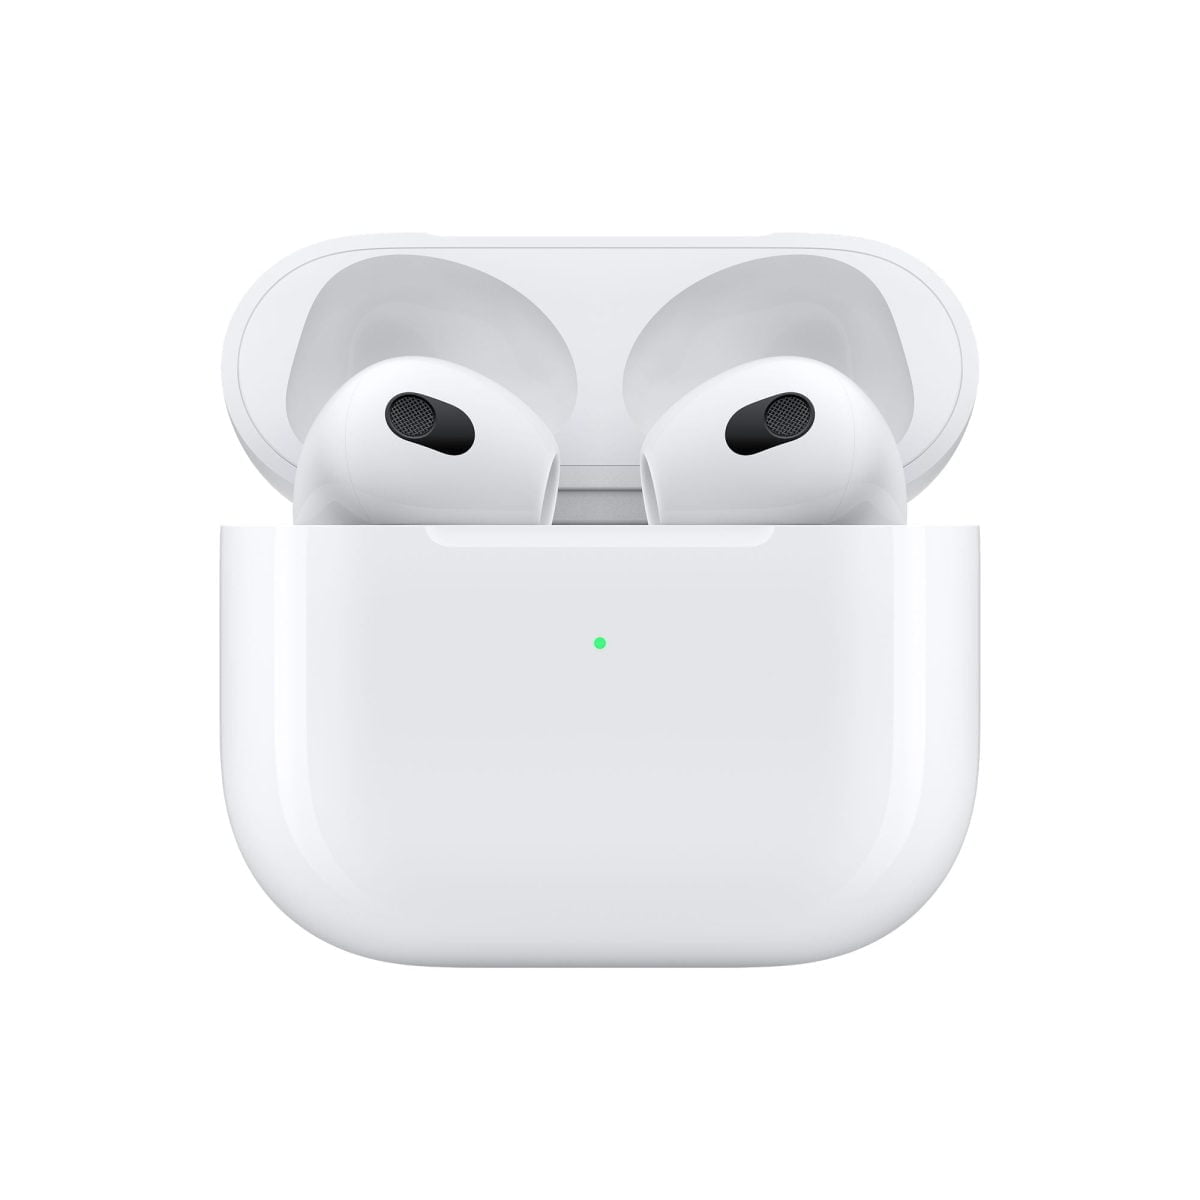 Mme73 Av2 Apple &Lt;H1&Gt;Apple Airpods (3Rd Generation) - White&Lt;/H1&Gt; &Lt;Div Class=&Quot;Rc-Pdsection-Mainpanel Column Large-9 Small-12&Quot;&Gt; &Lt;H2 Class=&Quot;H4-Para-Title&Quot;&Gt;All-New Design&Lt;/H2&Gt; &Lt;Div Class=&Quot;Para-List As-Pdp-Lastparalist&Quot;&Gt; Airpods Are Lightweight And Offer A Contoured Design. They Sit At Just The Right Angle For Comfort And To Better Direct Audio To Your Ear. The Stem Is 33 Percent Shorter Than Airpods (2Nd Generation) And Includes A Force Sensor To Easily Control Music And Calls. &Lt;/Div&Gt; &Lt;/Div&Gt; Apple Airpods Apple Airpods (3Rd Generation) - White (Mme73)